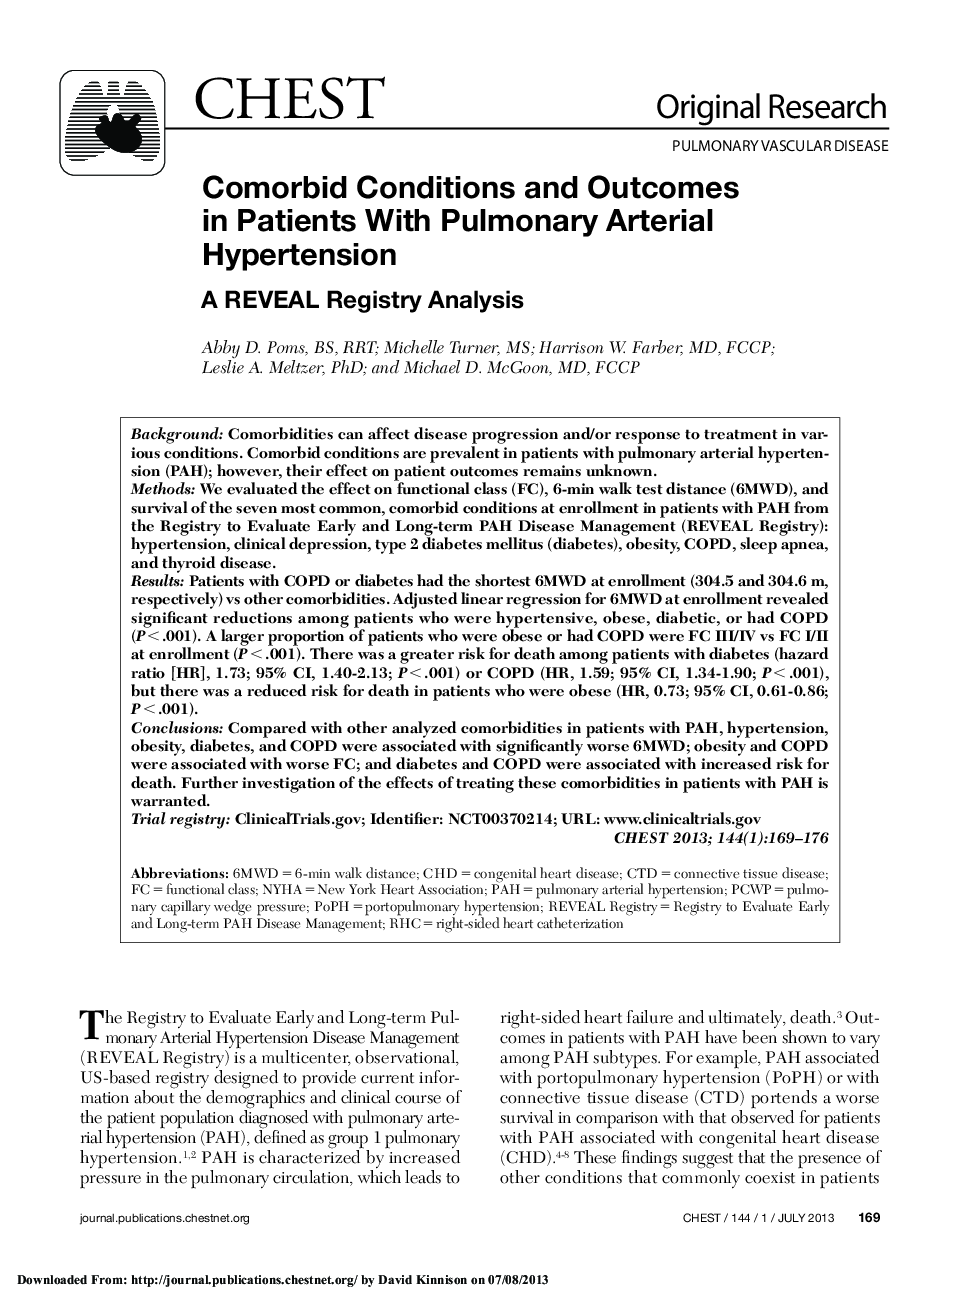 Comorbid Conditions and Outcomes in Patients With Pulmonary Arterial Hypertension